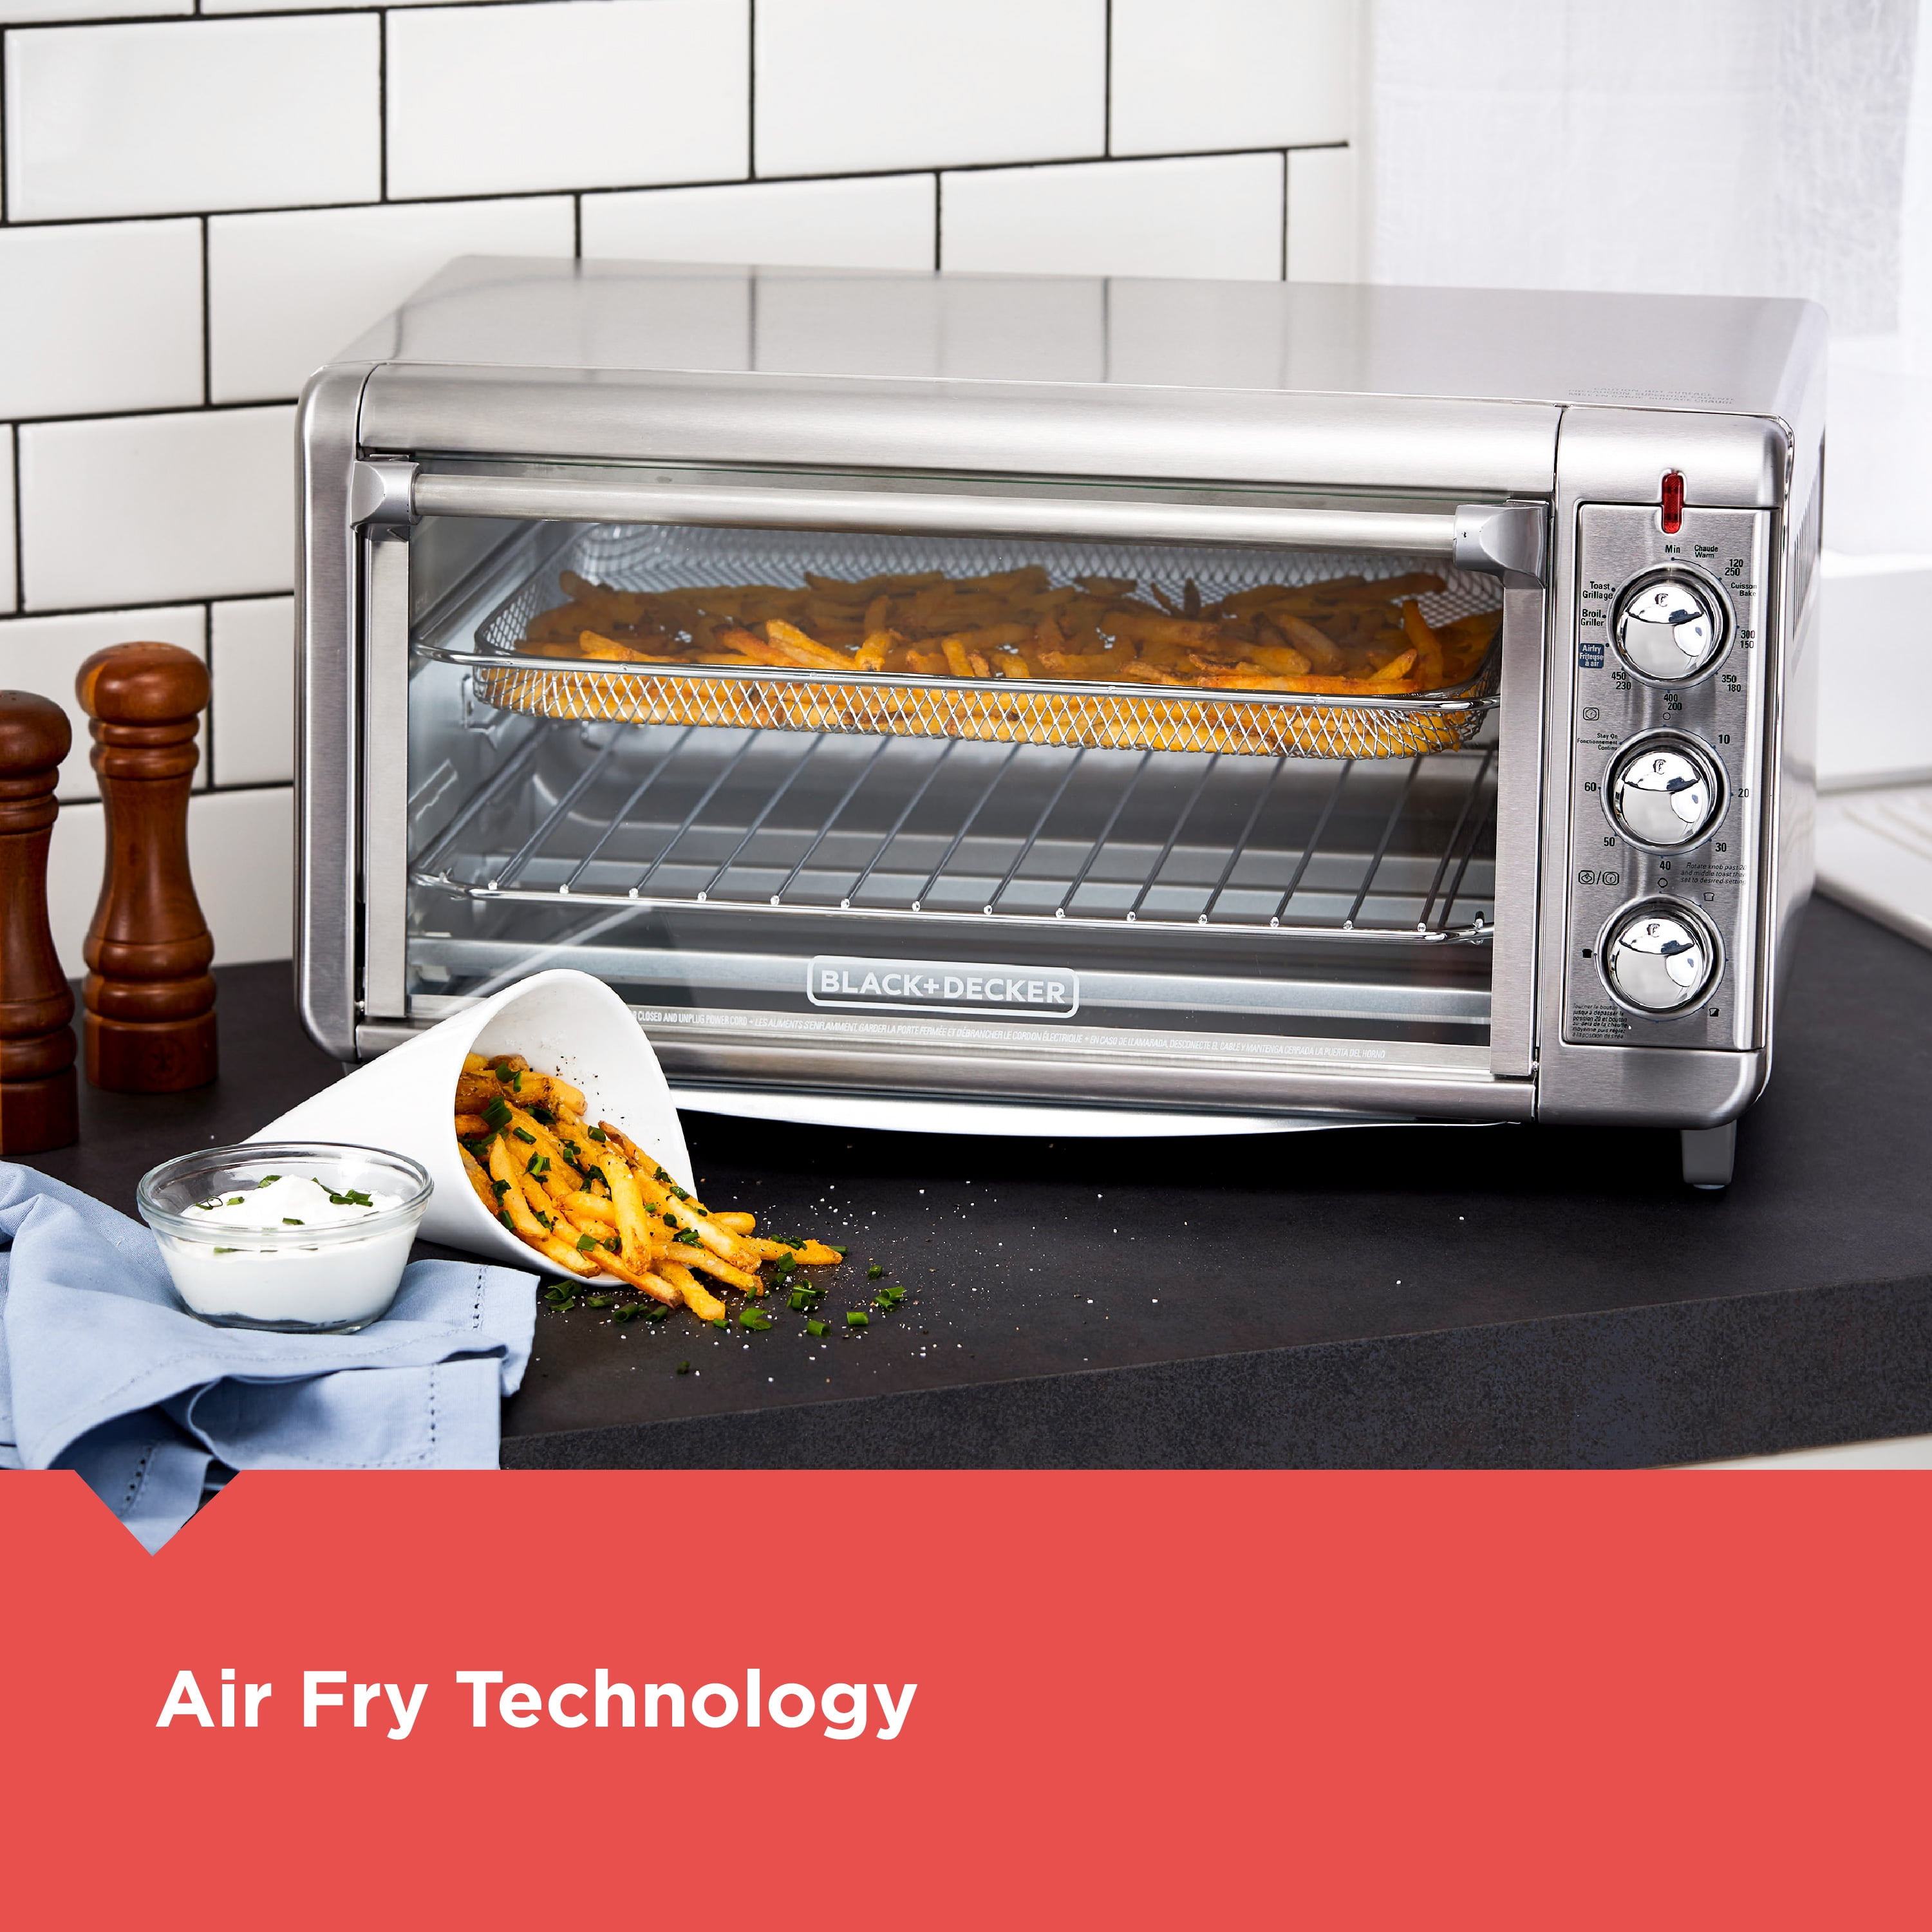 Black & Decker Air Fryer Toaster Oven for Sale in Penn Hills, PA